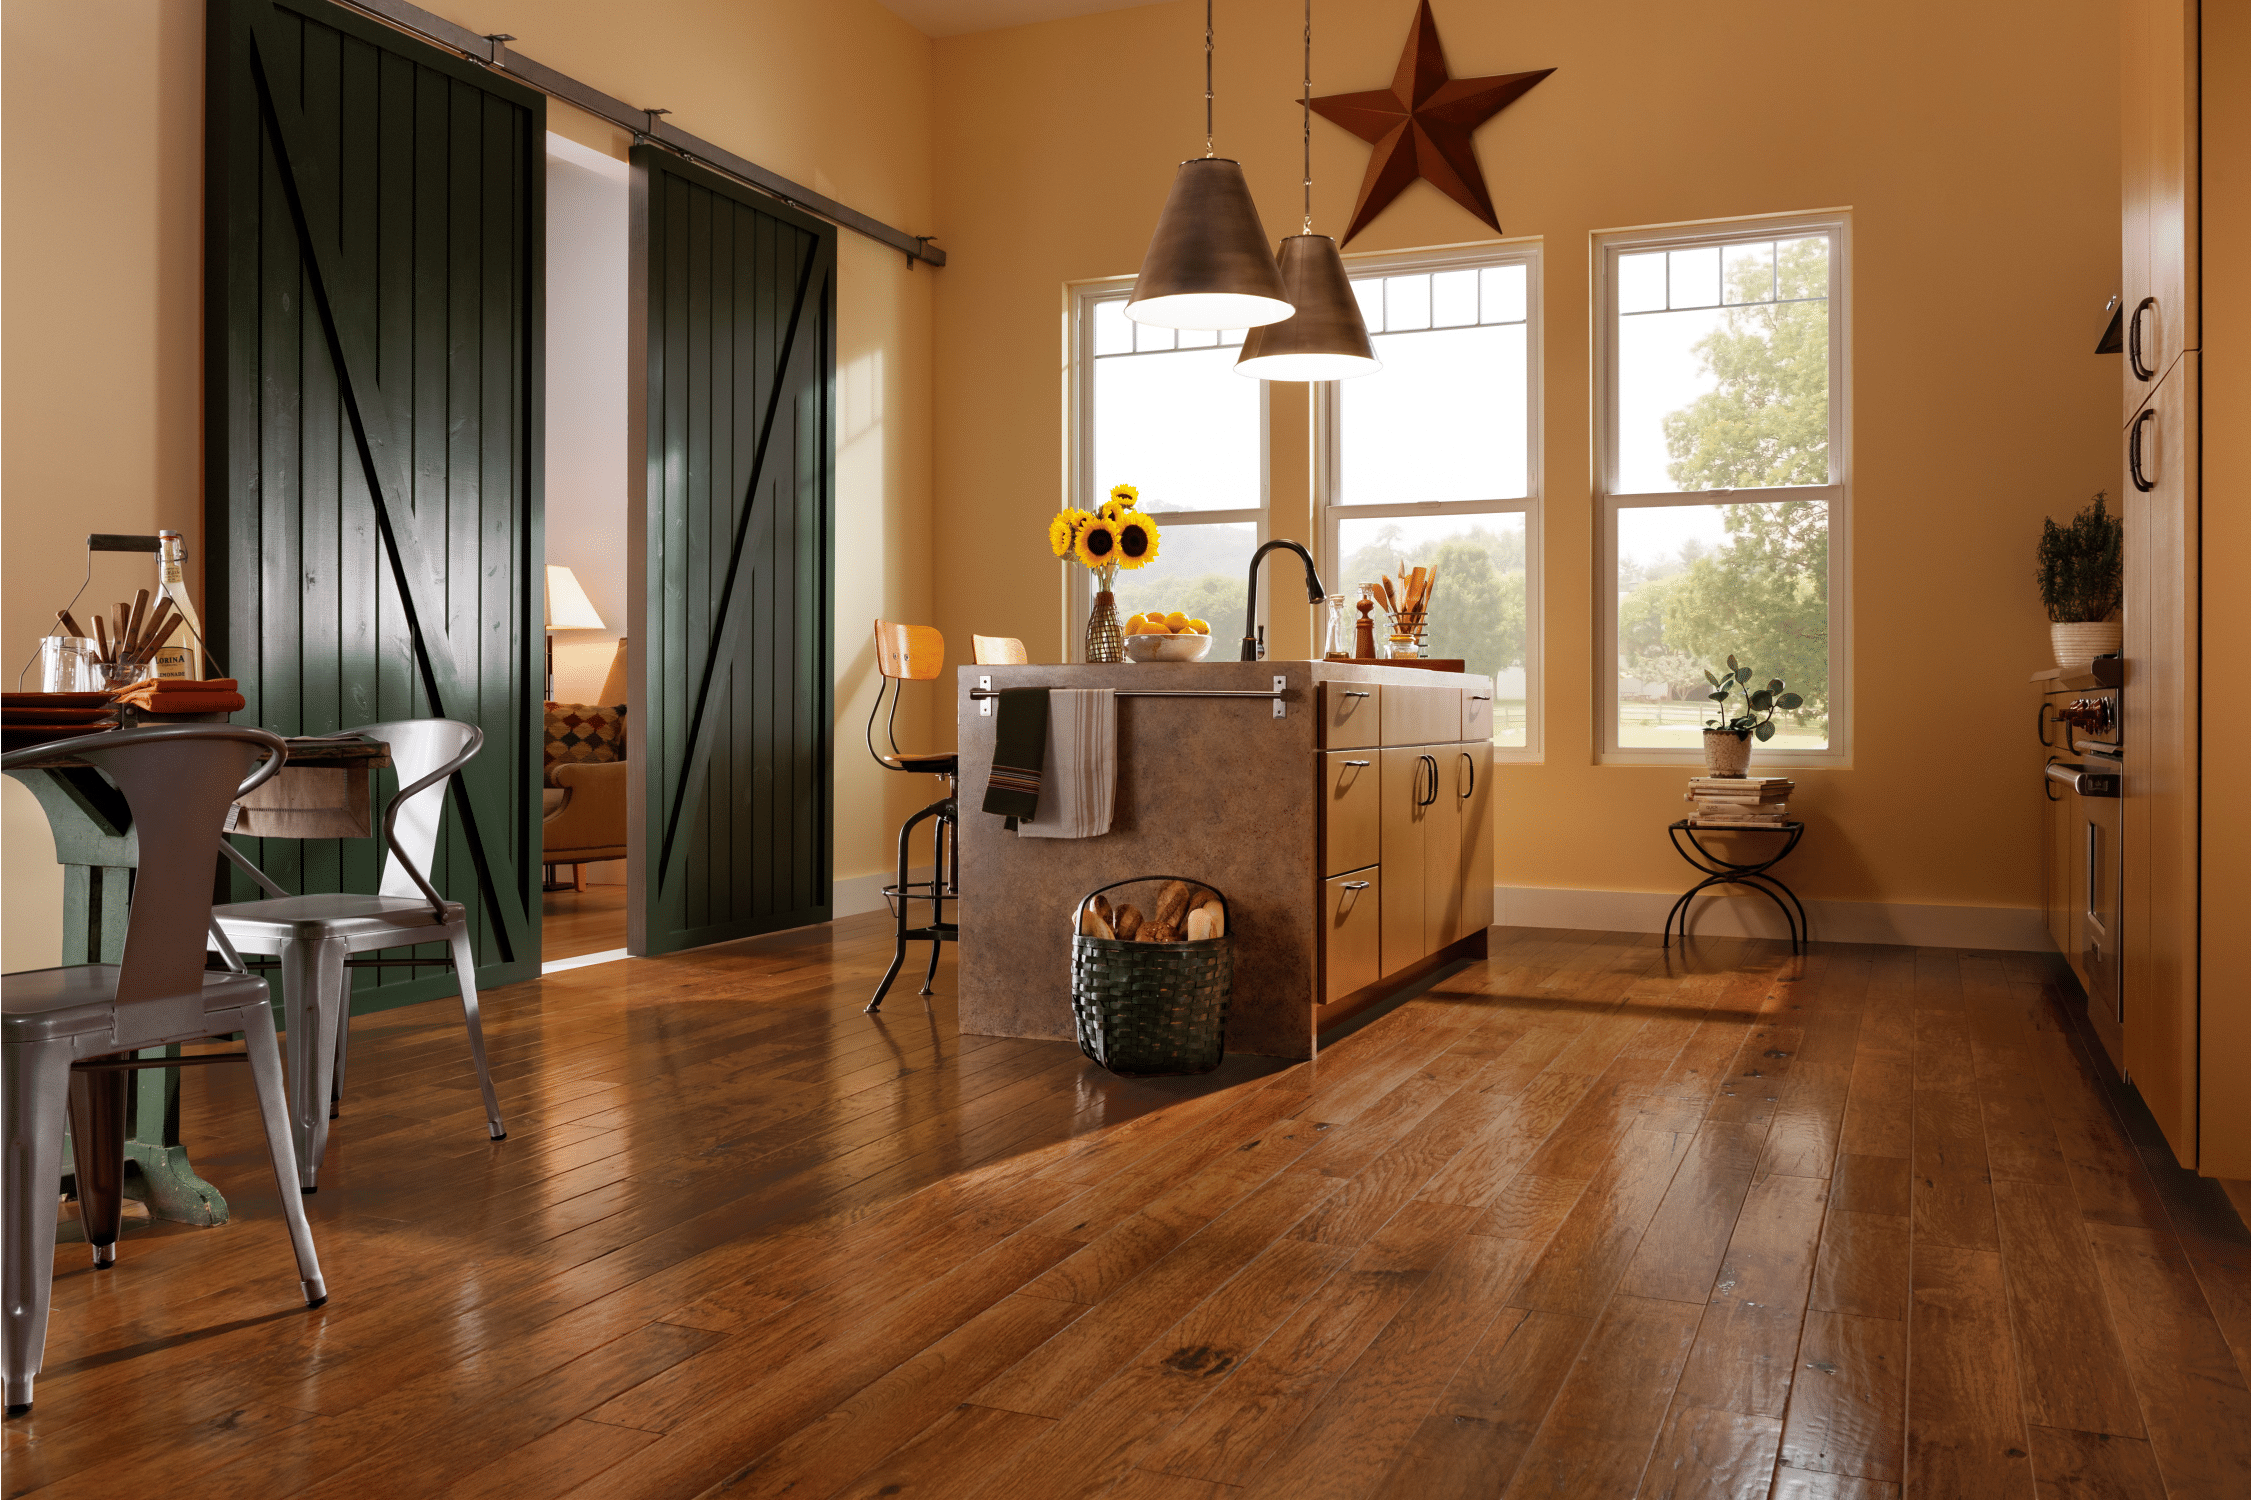 A look at hardwood flooring in a farmhouse style kitchen.